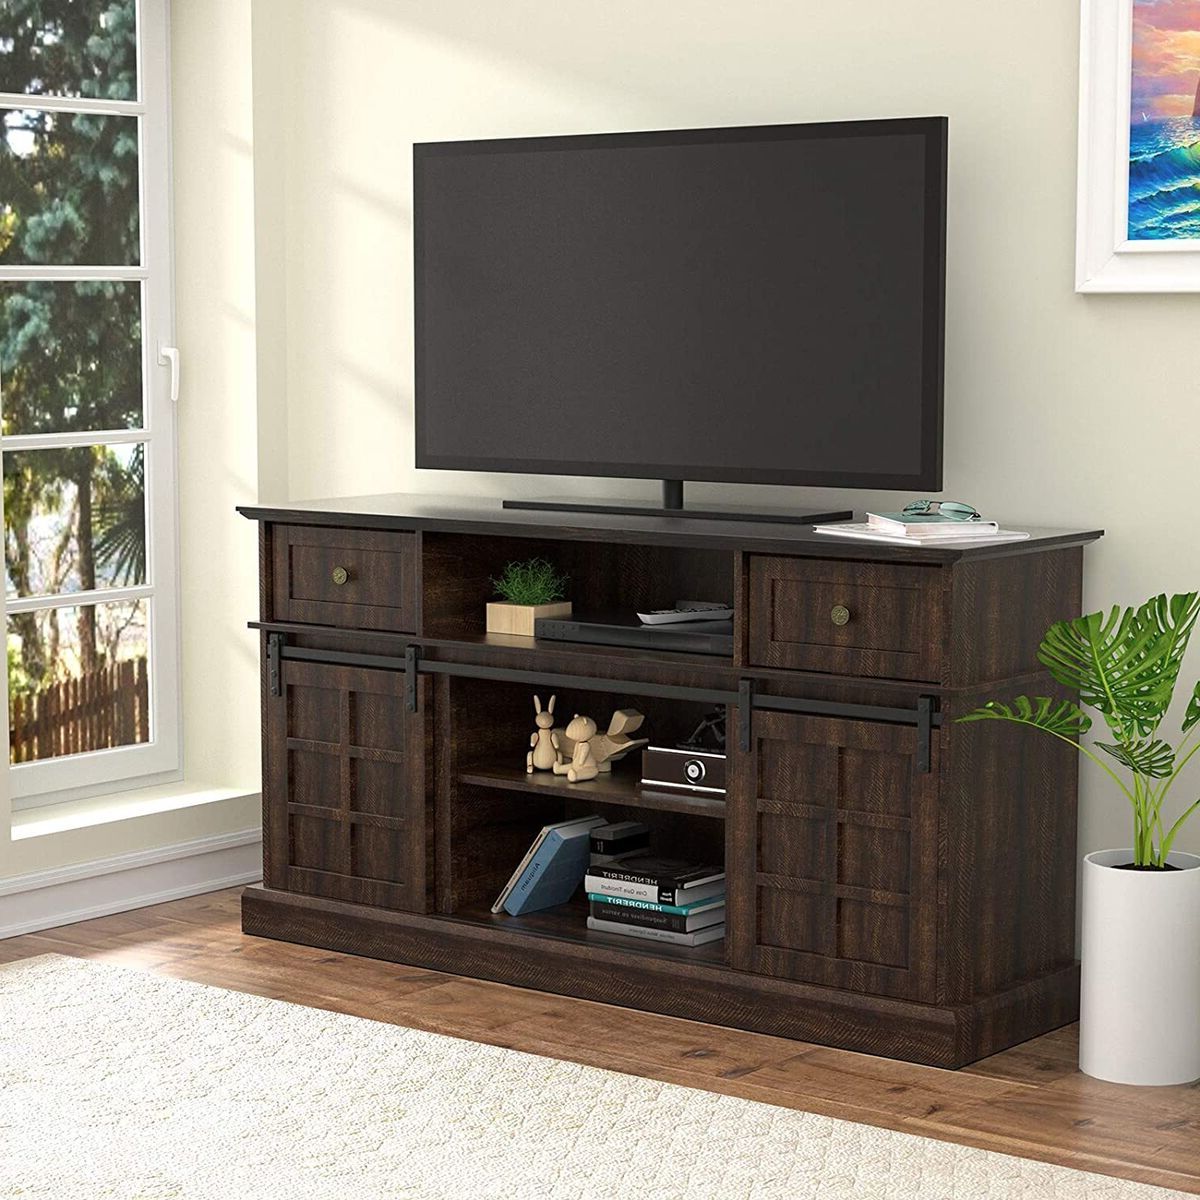 58" Farmhouse Tv Stand For Tvs Up To 65 Inch Entertainment Center Media  Cabinet | Ebay Intended For Farmhouse Stands For Tvs (Gallery 20 of 20)